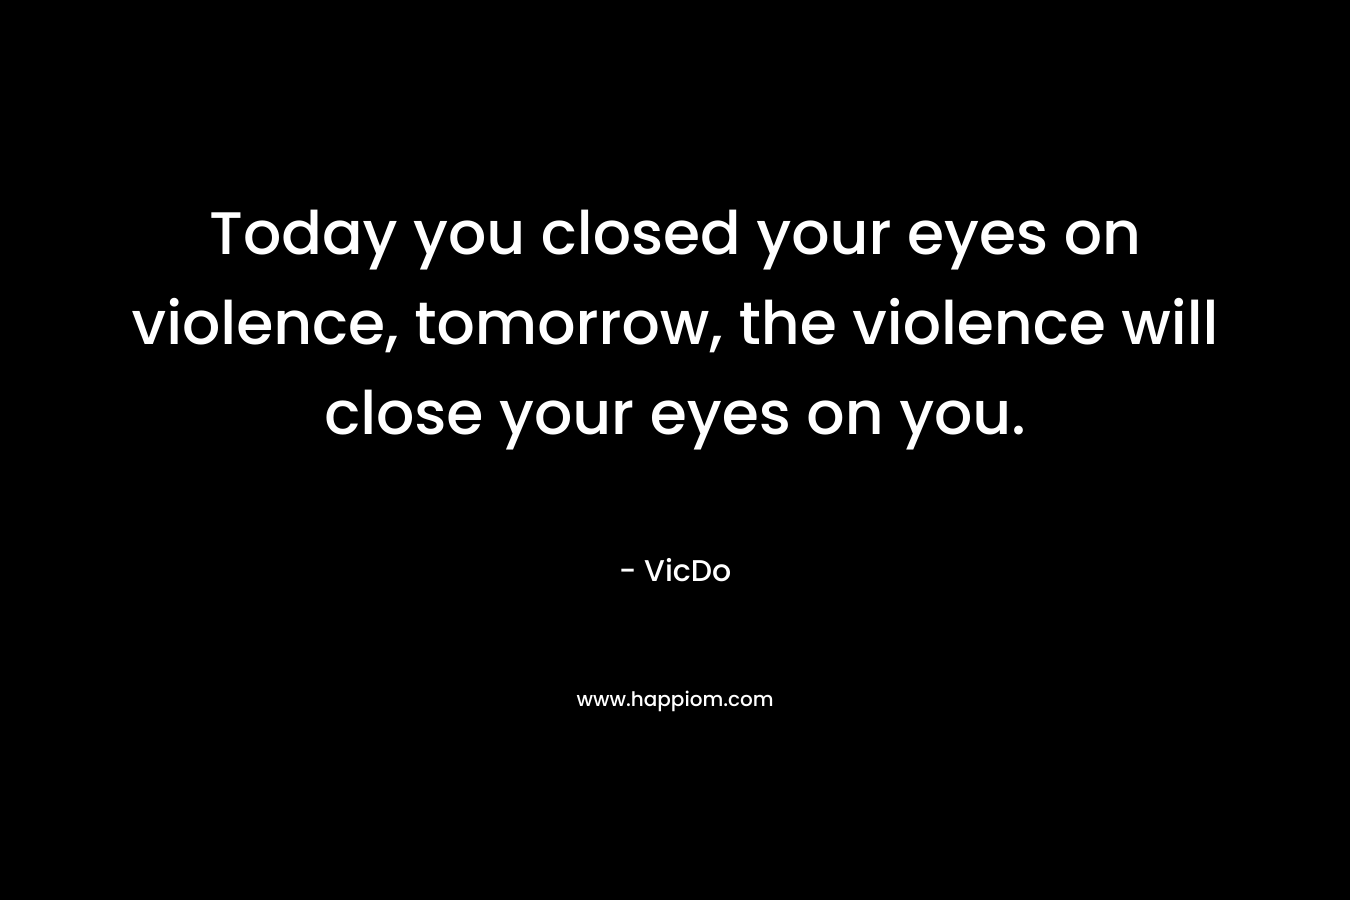 Today you closed your eyes on violence, tomorrow, the violence will close your eyes on you. – VicDo